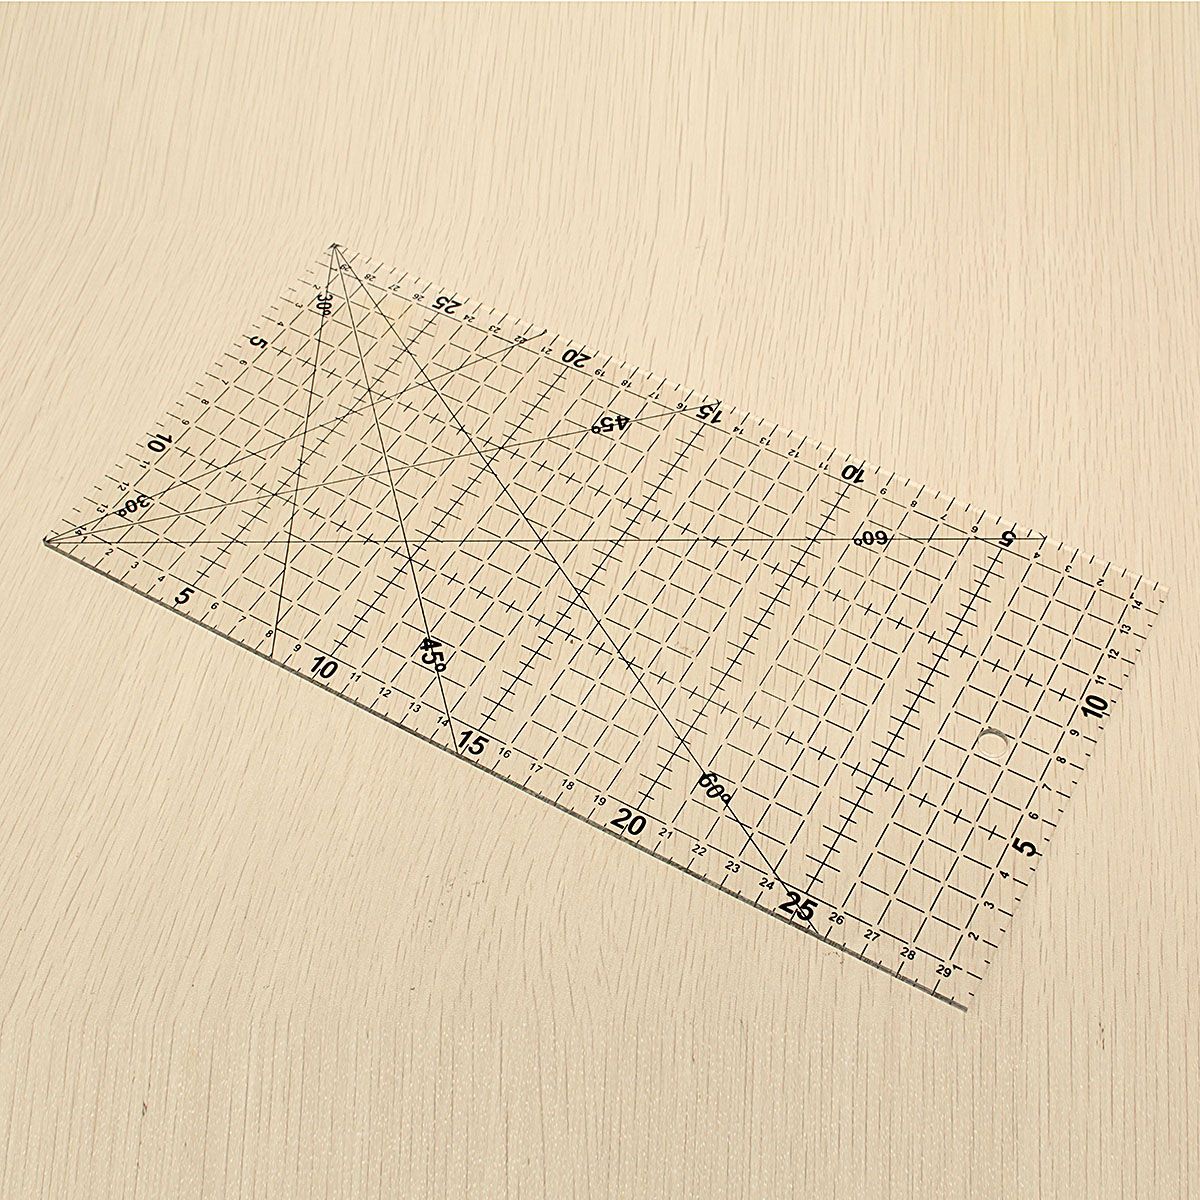 Quilting-Sewing-Patchwork-Foot-Aligned-Ruler-Grid-Cutting-Tailor-Craft-Scale-1158130